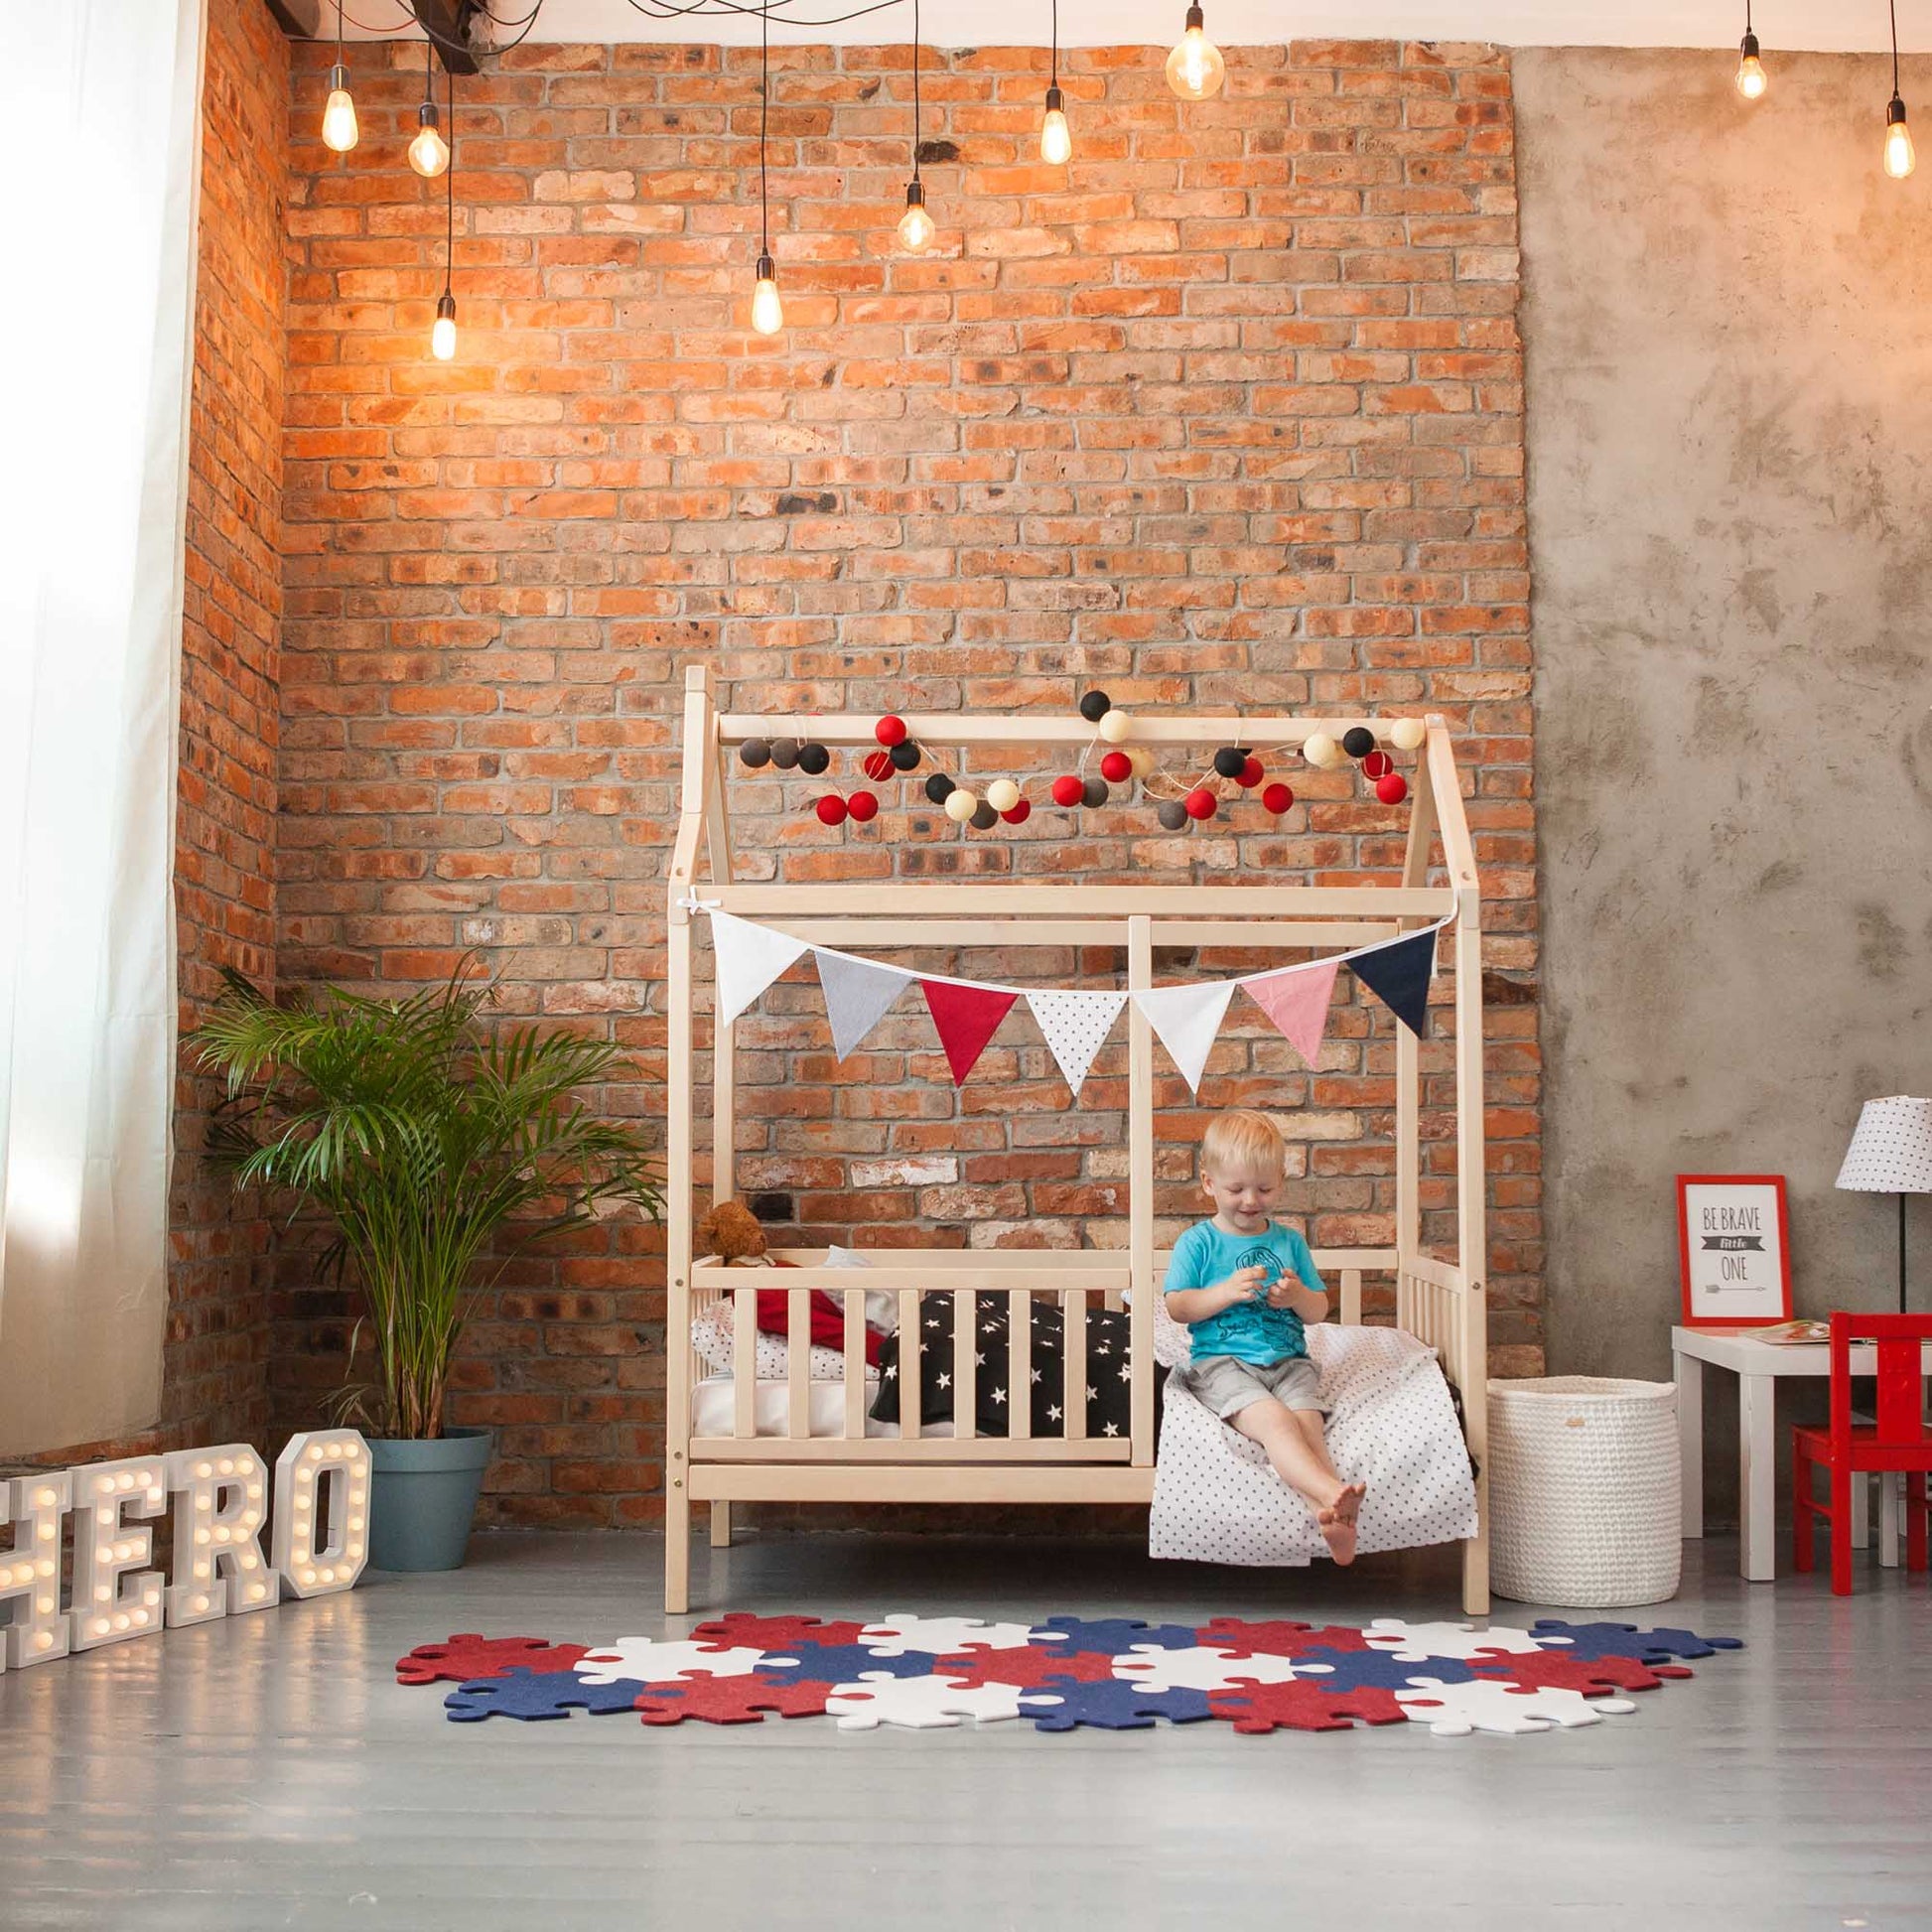 A child is sitting on a Kids' house bed on legs with a fence in a room with a brick wall.